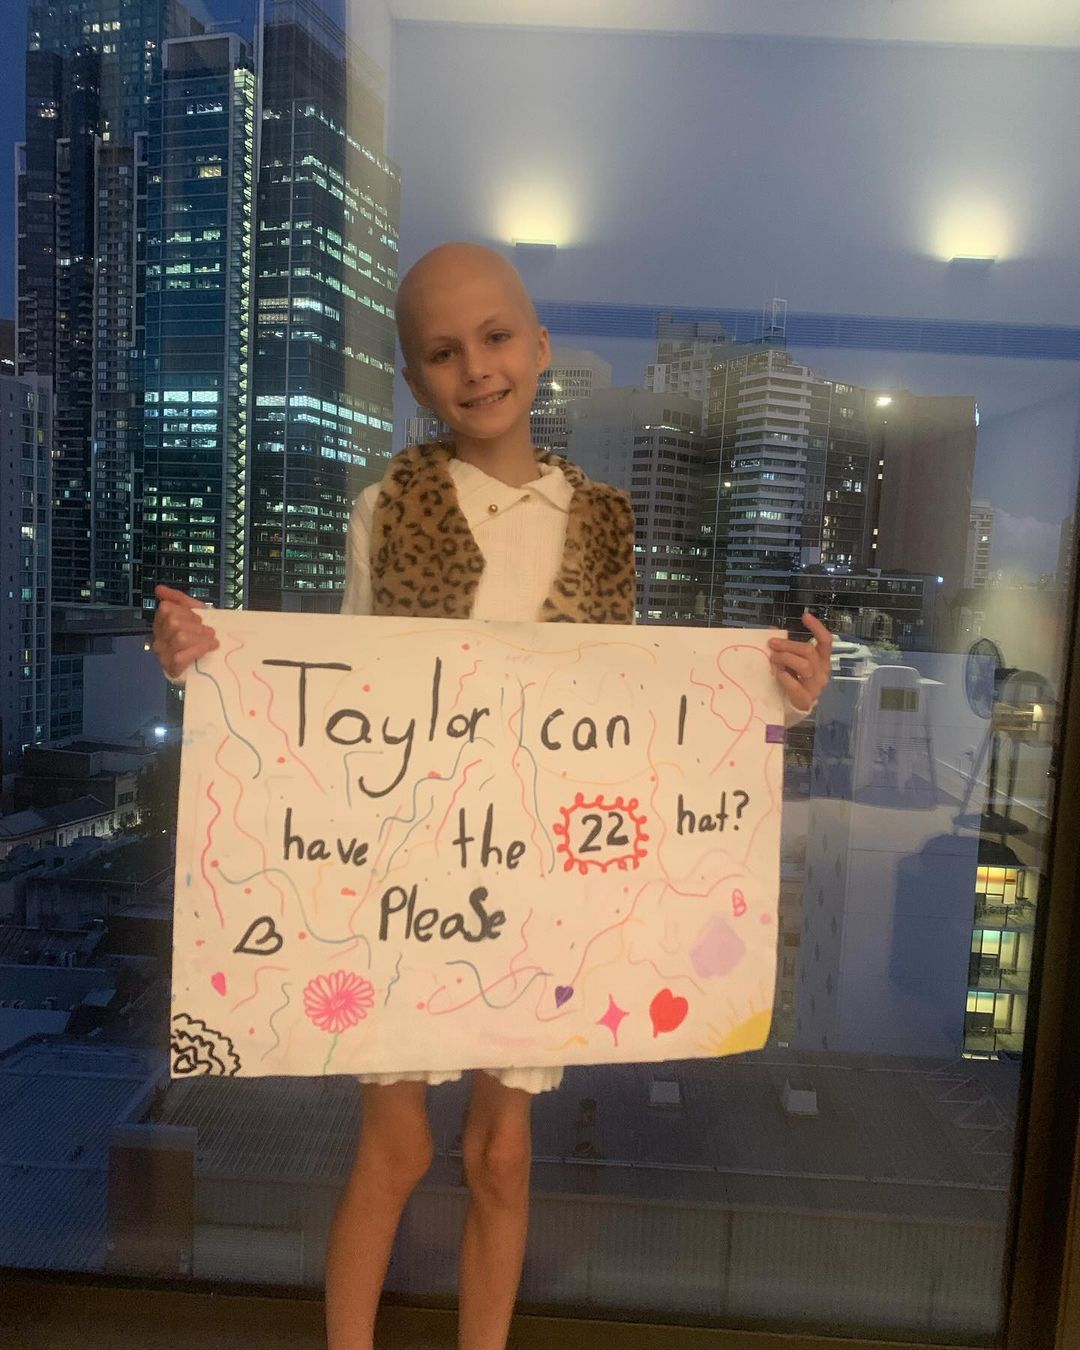 Scarlett Oliver wishes to get taylor swift 22 hat